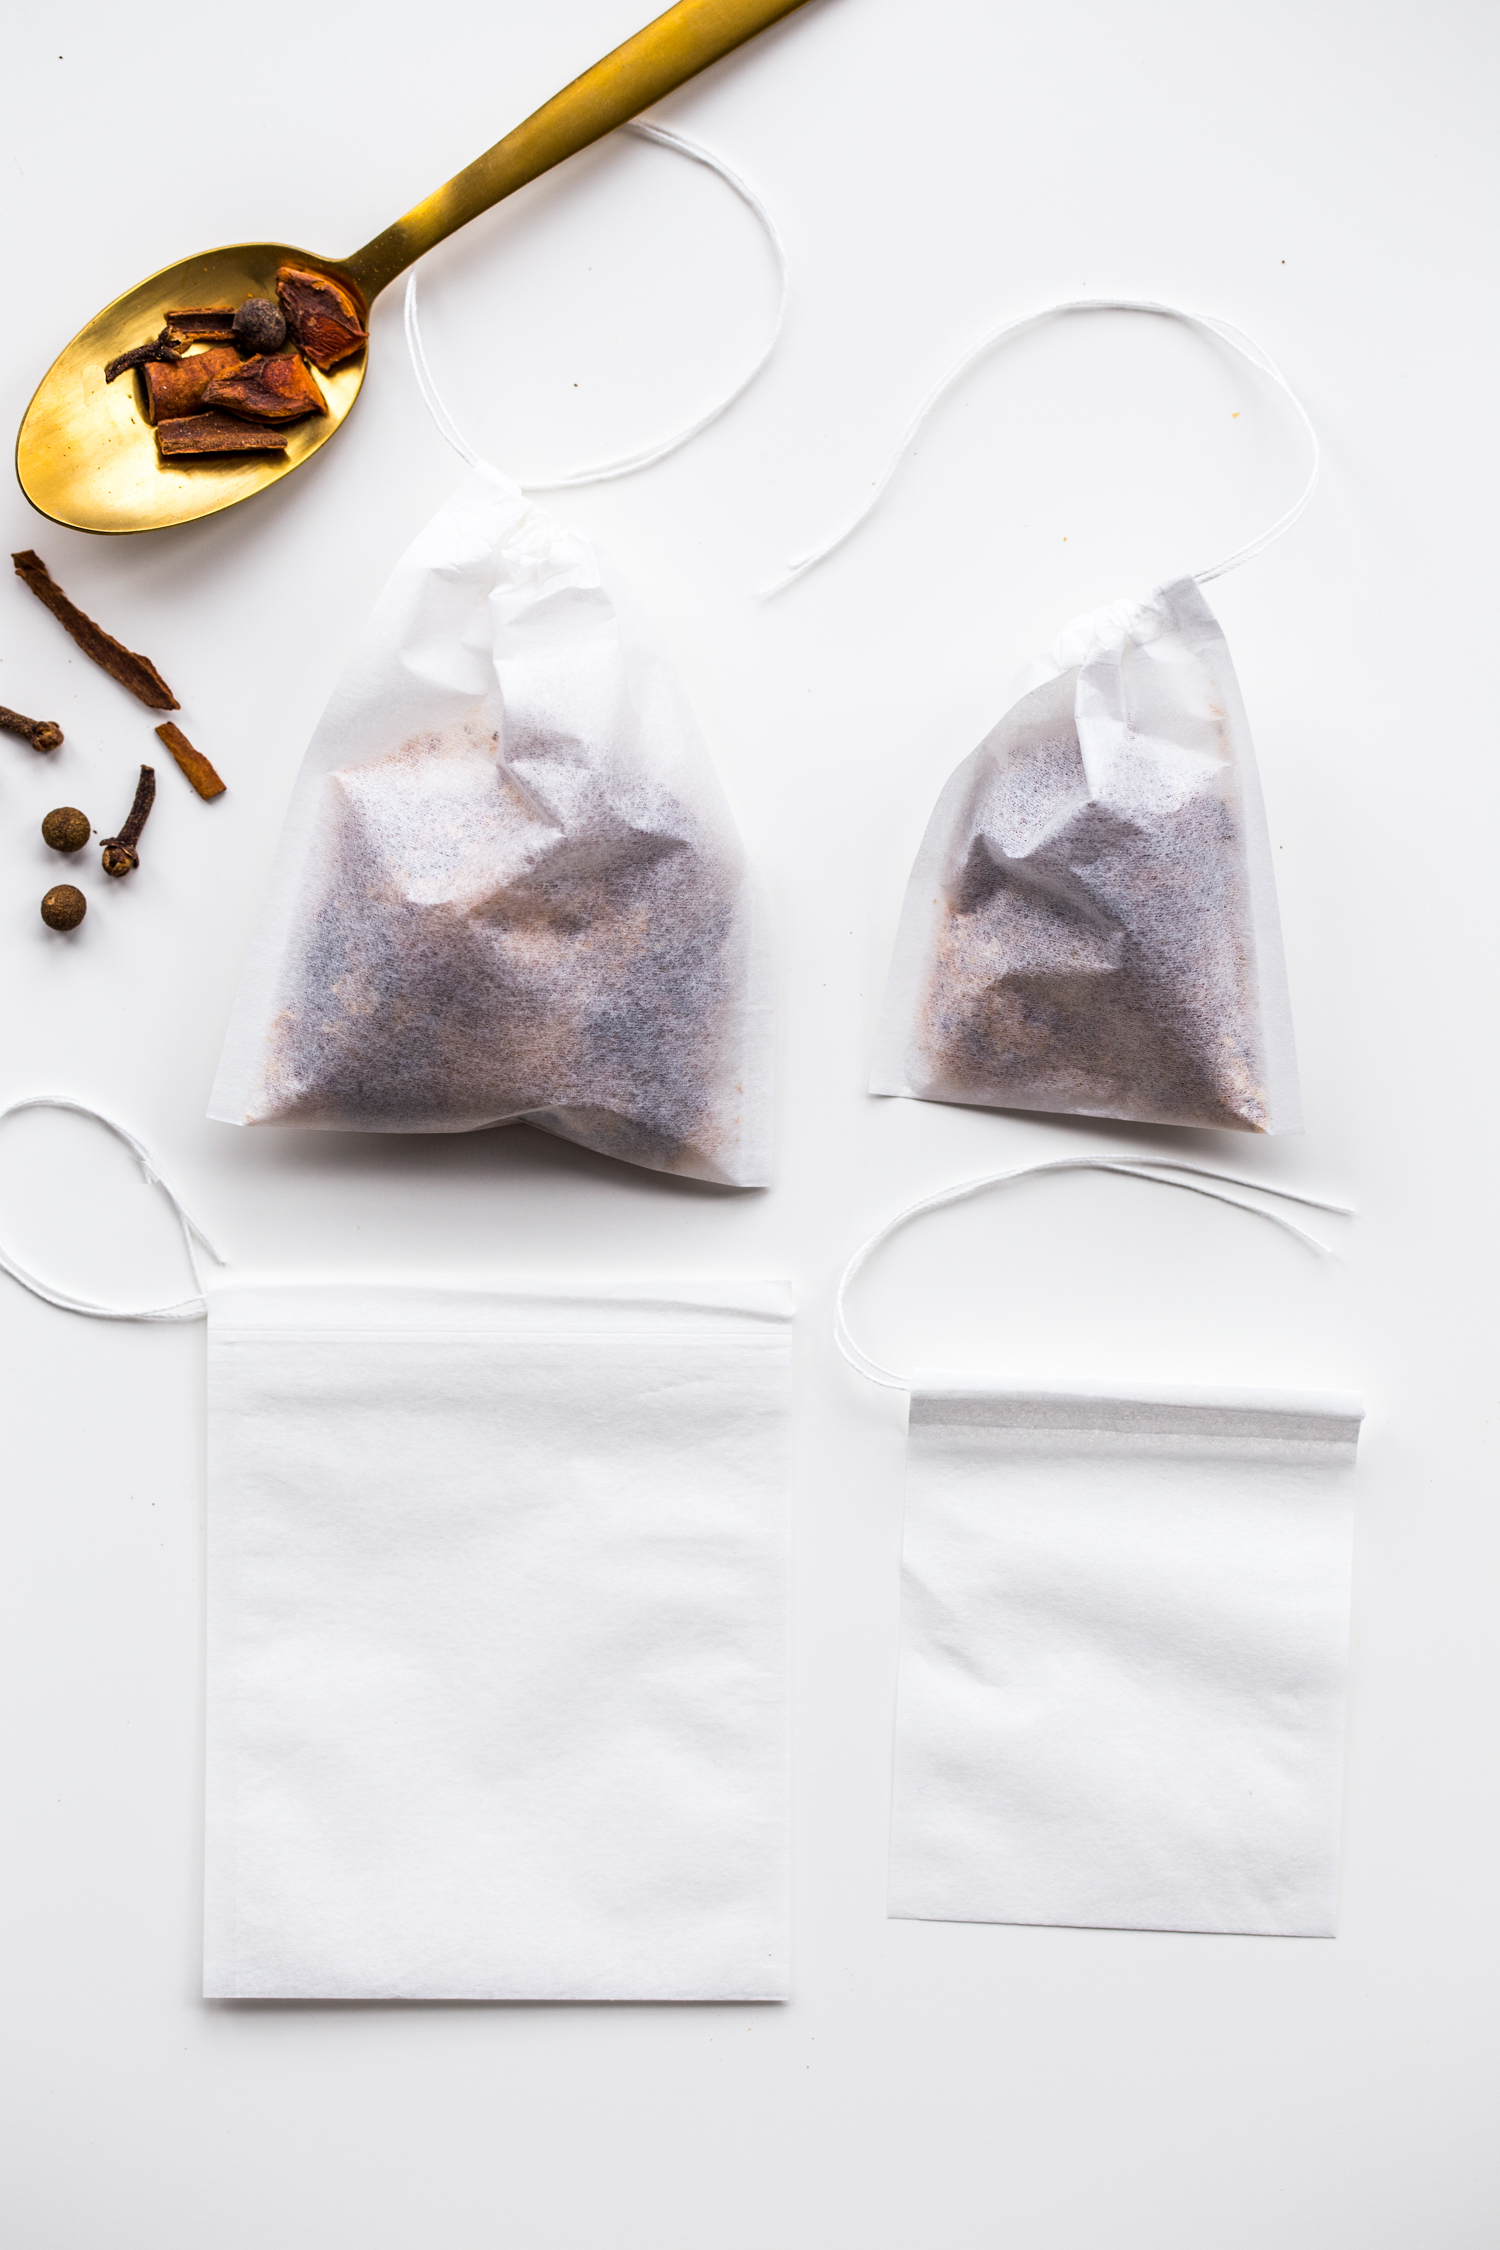 DIY Holiday Mulling Spices in individual tea bags